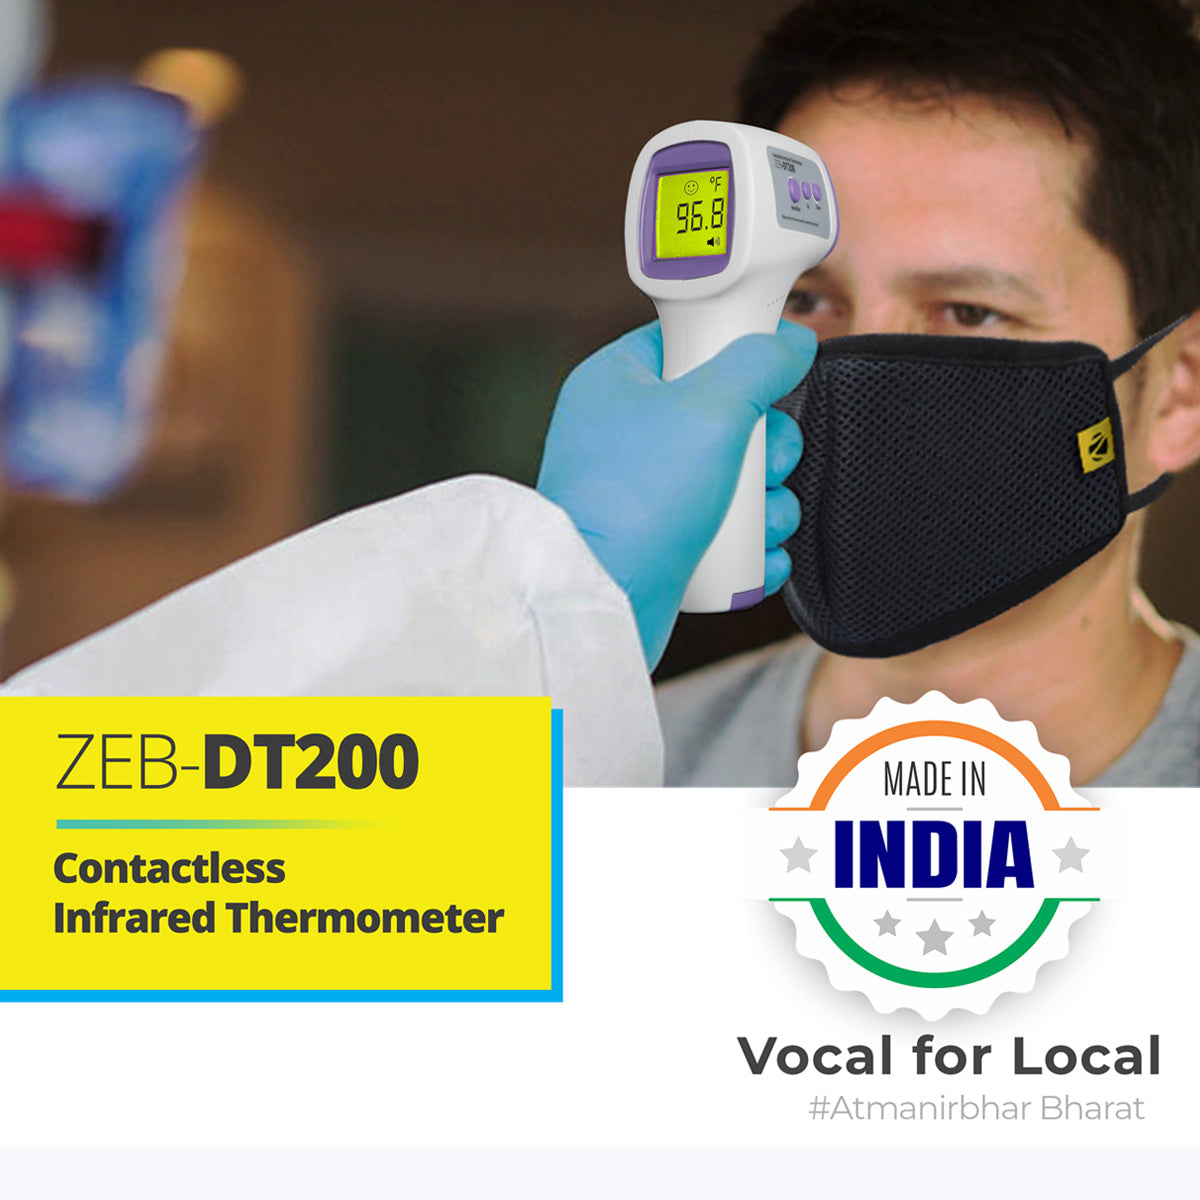 Zeb DT200 - Contactless Infrared Thermometer - Zebronics